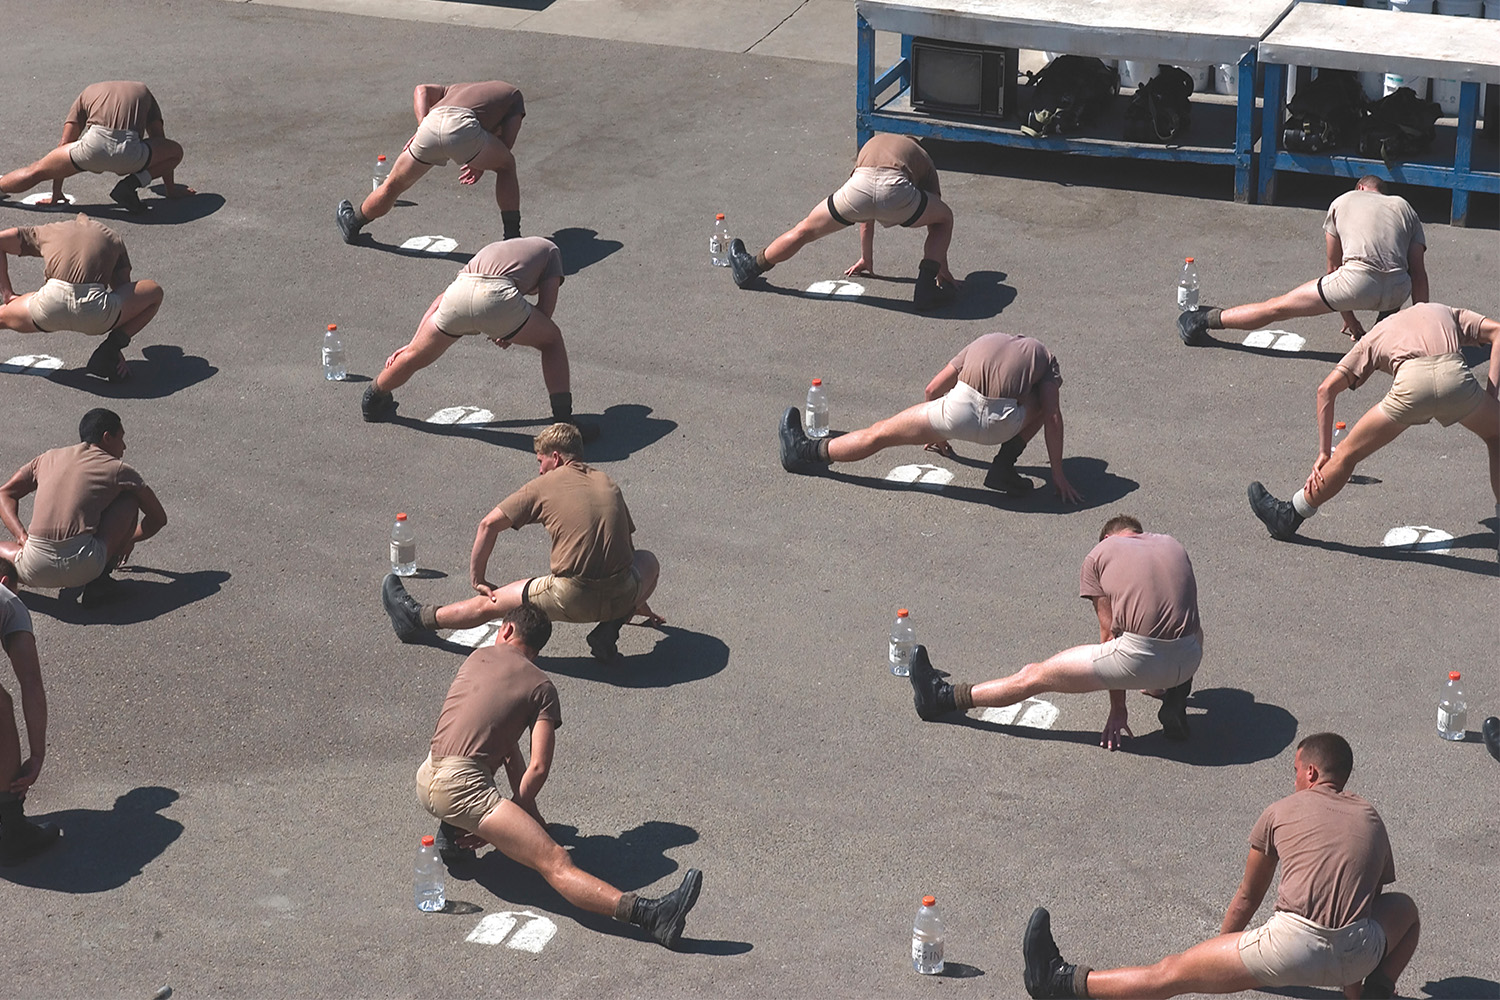 A group of men stretching on the ground. The frog pose is an ideal yoga pose and stretch for people who sit all day.